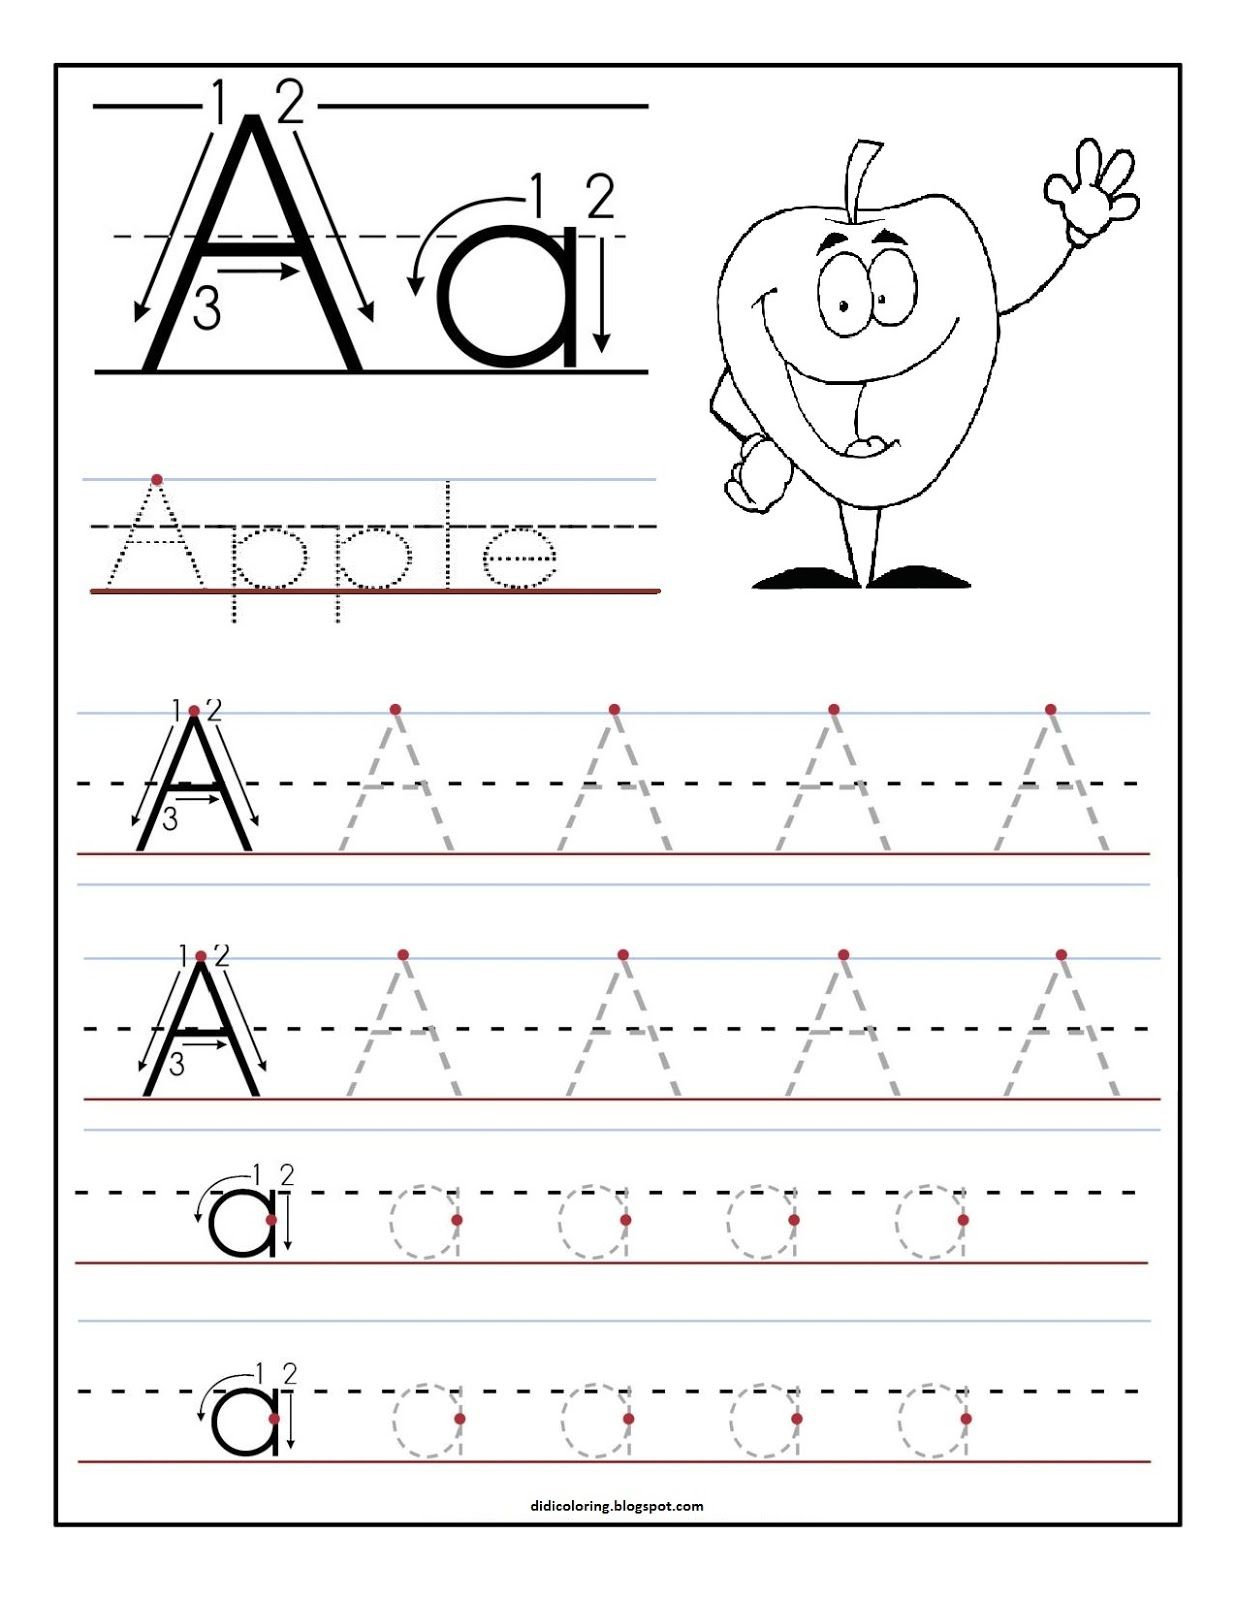 Free Printable Worksheet Letter A For Your Child To Learn And Write - Free Printable Alphabet Pages